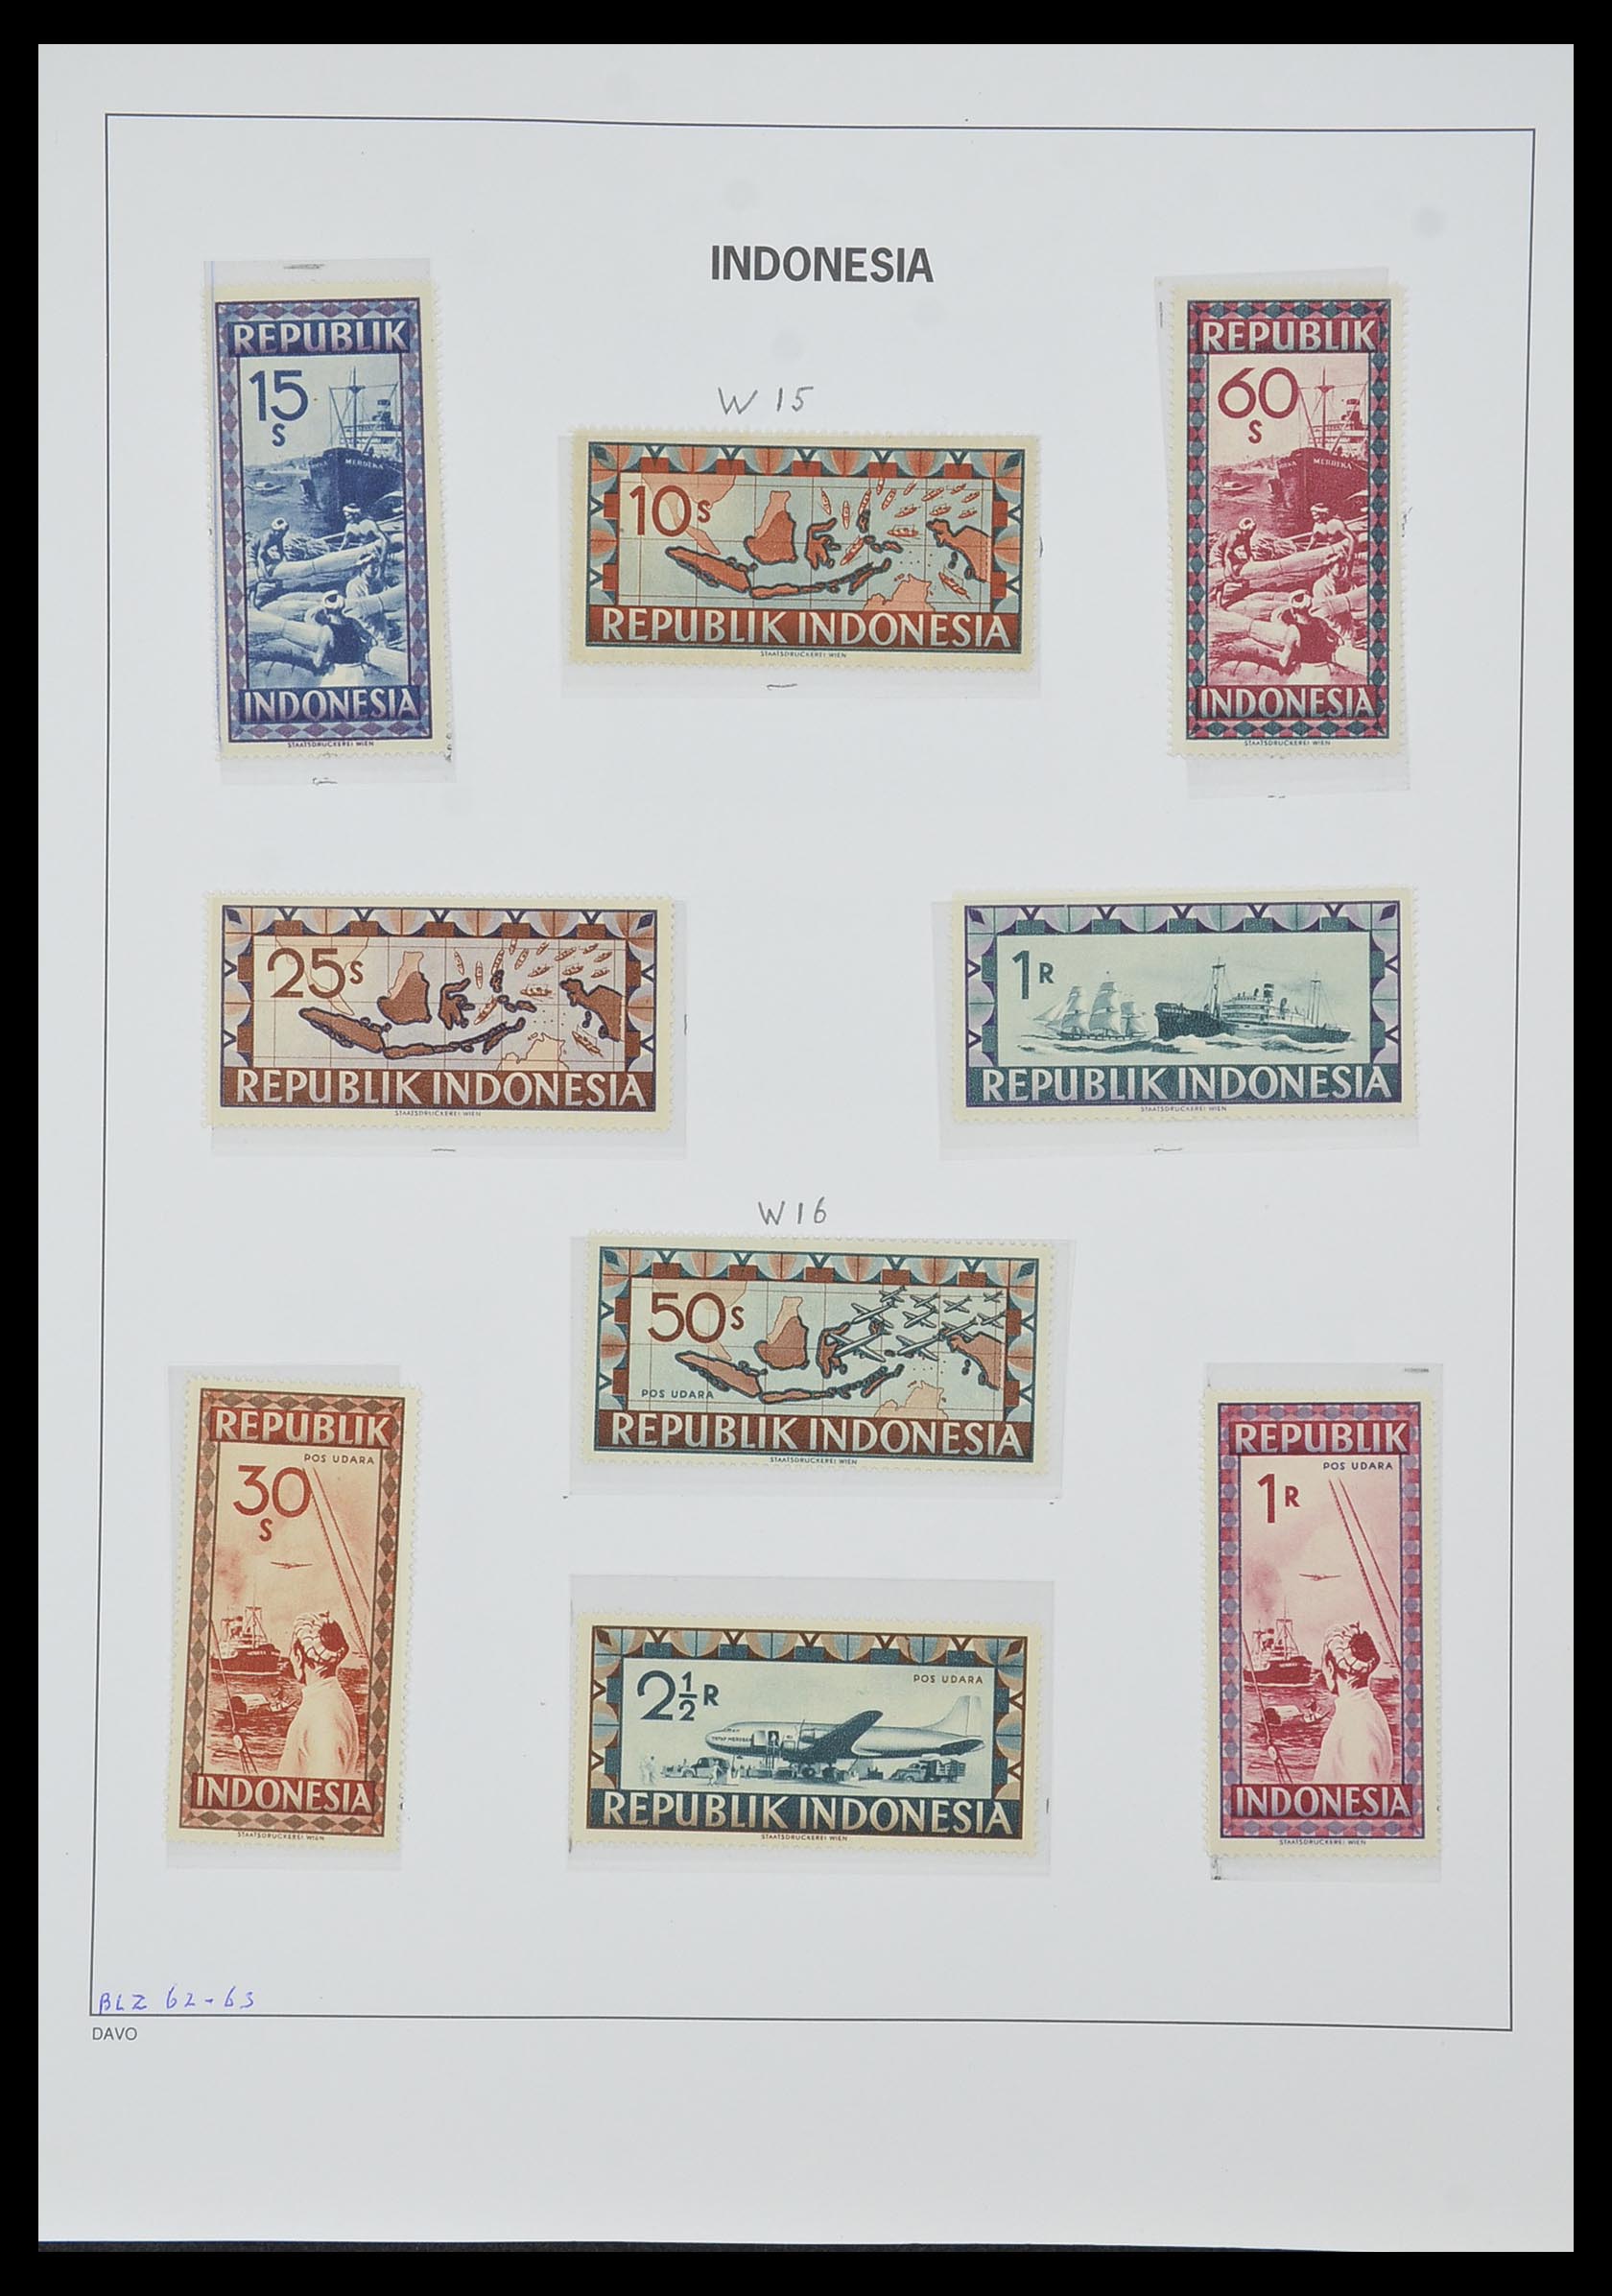 33988 026 - Stamp collection 33988 Vienna printings Indonesia.